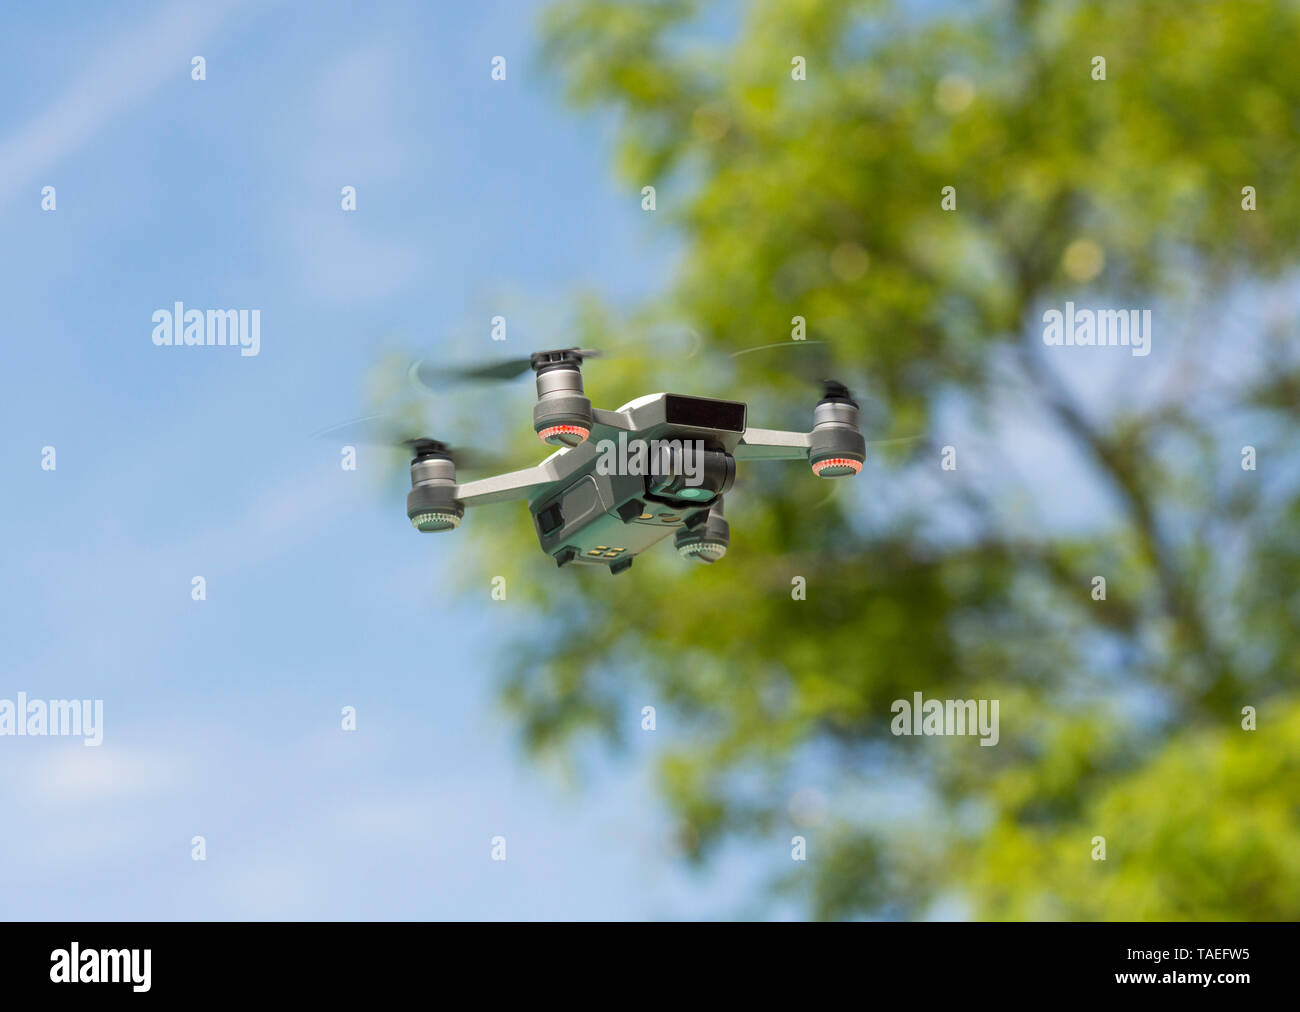 Drone copter, DJI Spark, flying with high resolution digital camera,  hovering and passing trees Stock Photo - Alamy